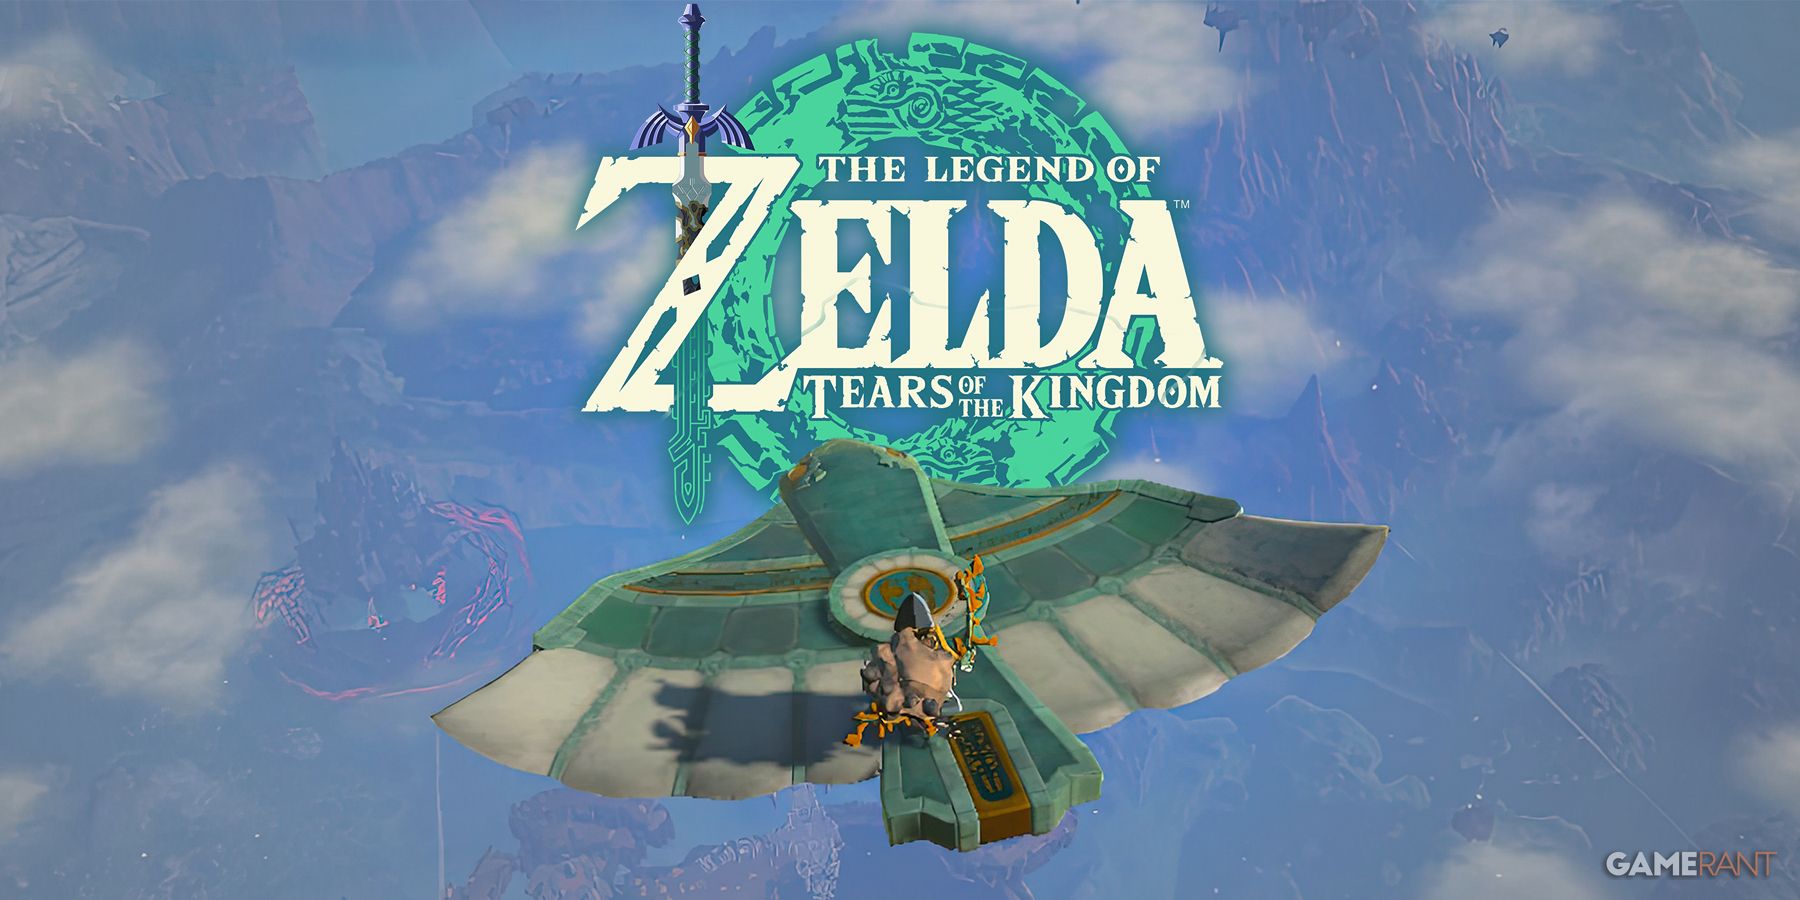 The Legend Of Zelda: Tears Of The Kingdom's Metascore Indicates A